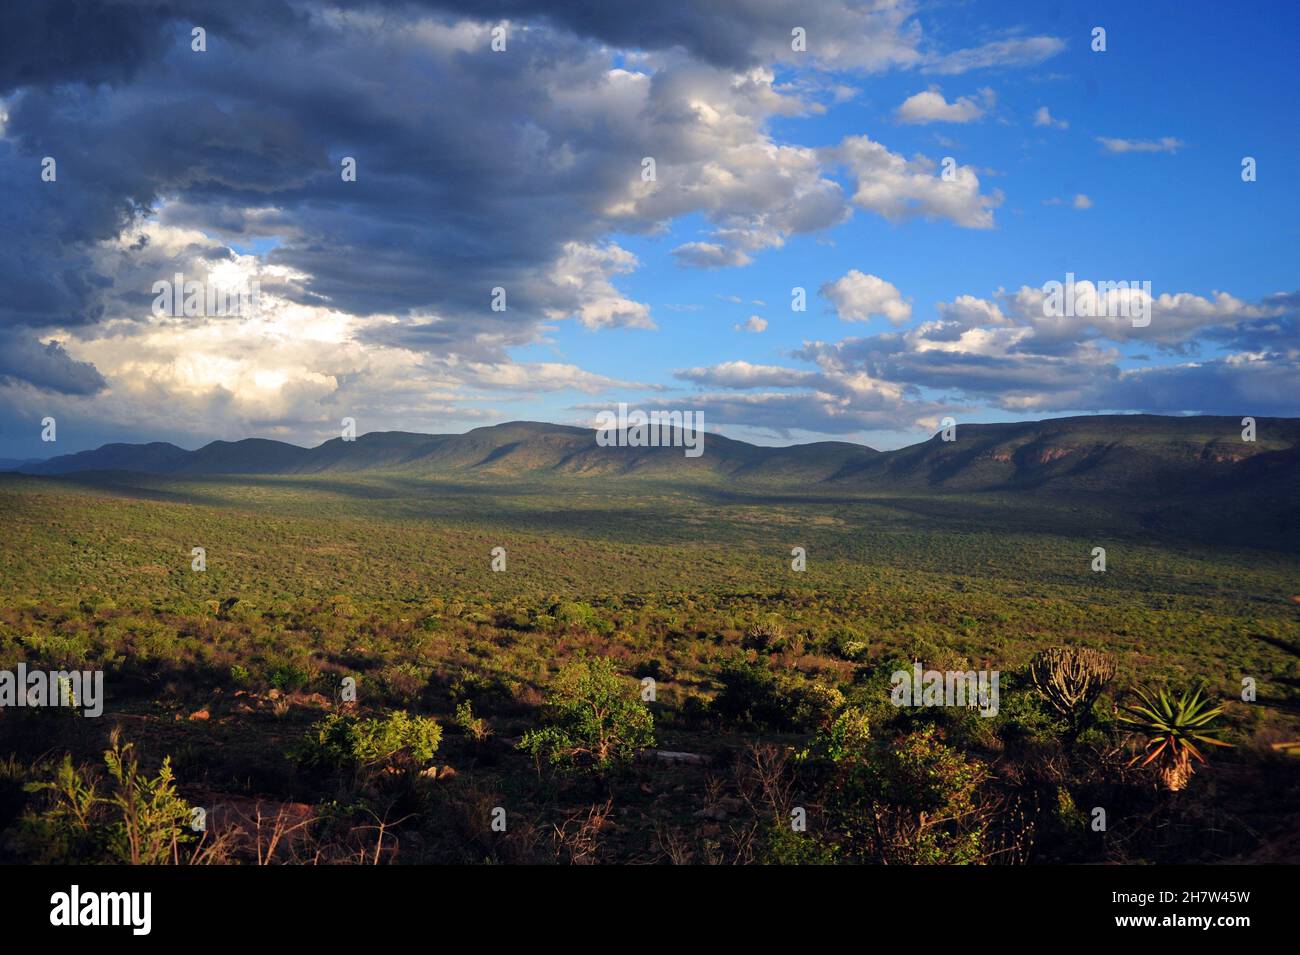 The landscape in Limpopo comes alive during the rainy season as farmers prepare the lands for planting. Stock Photo